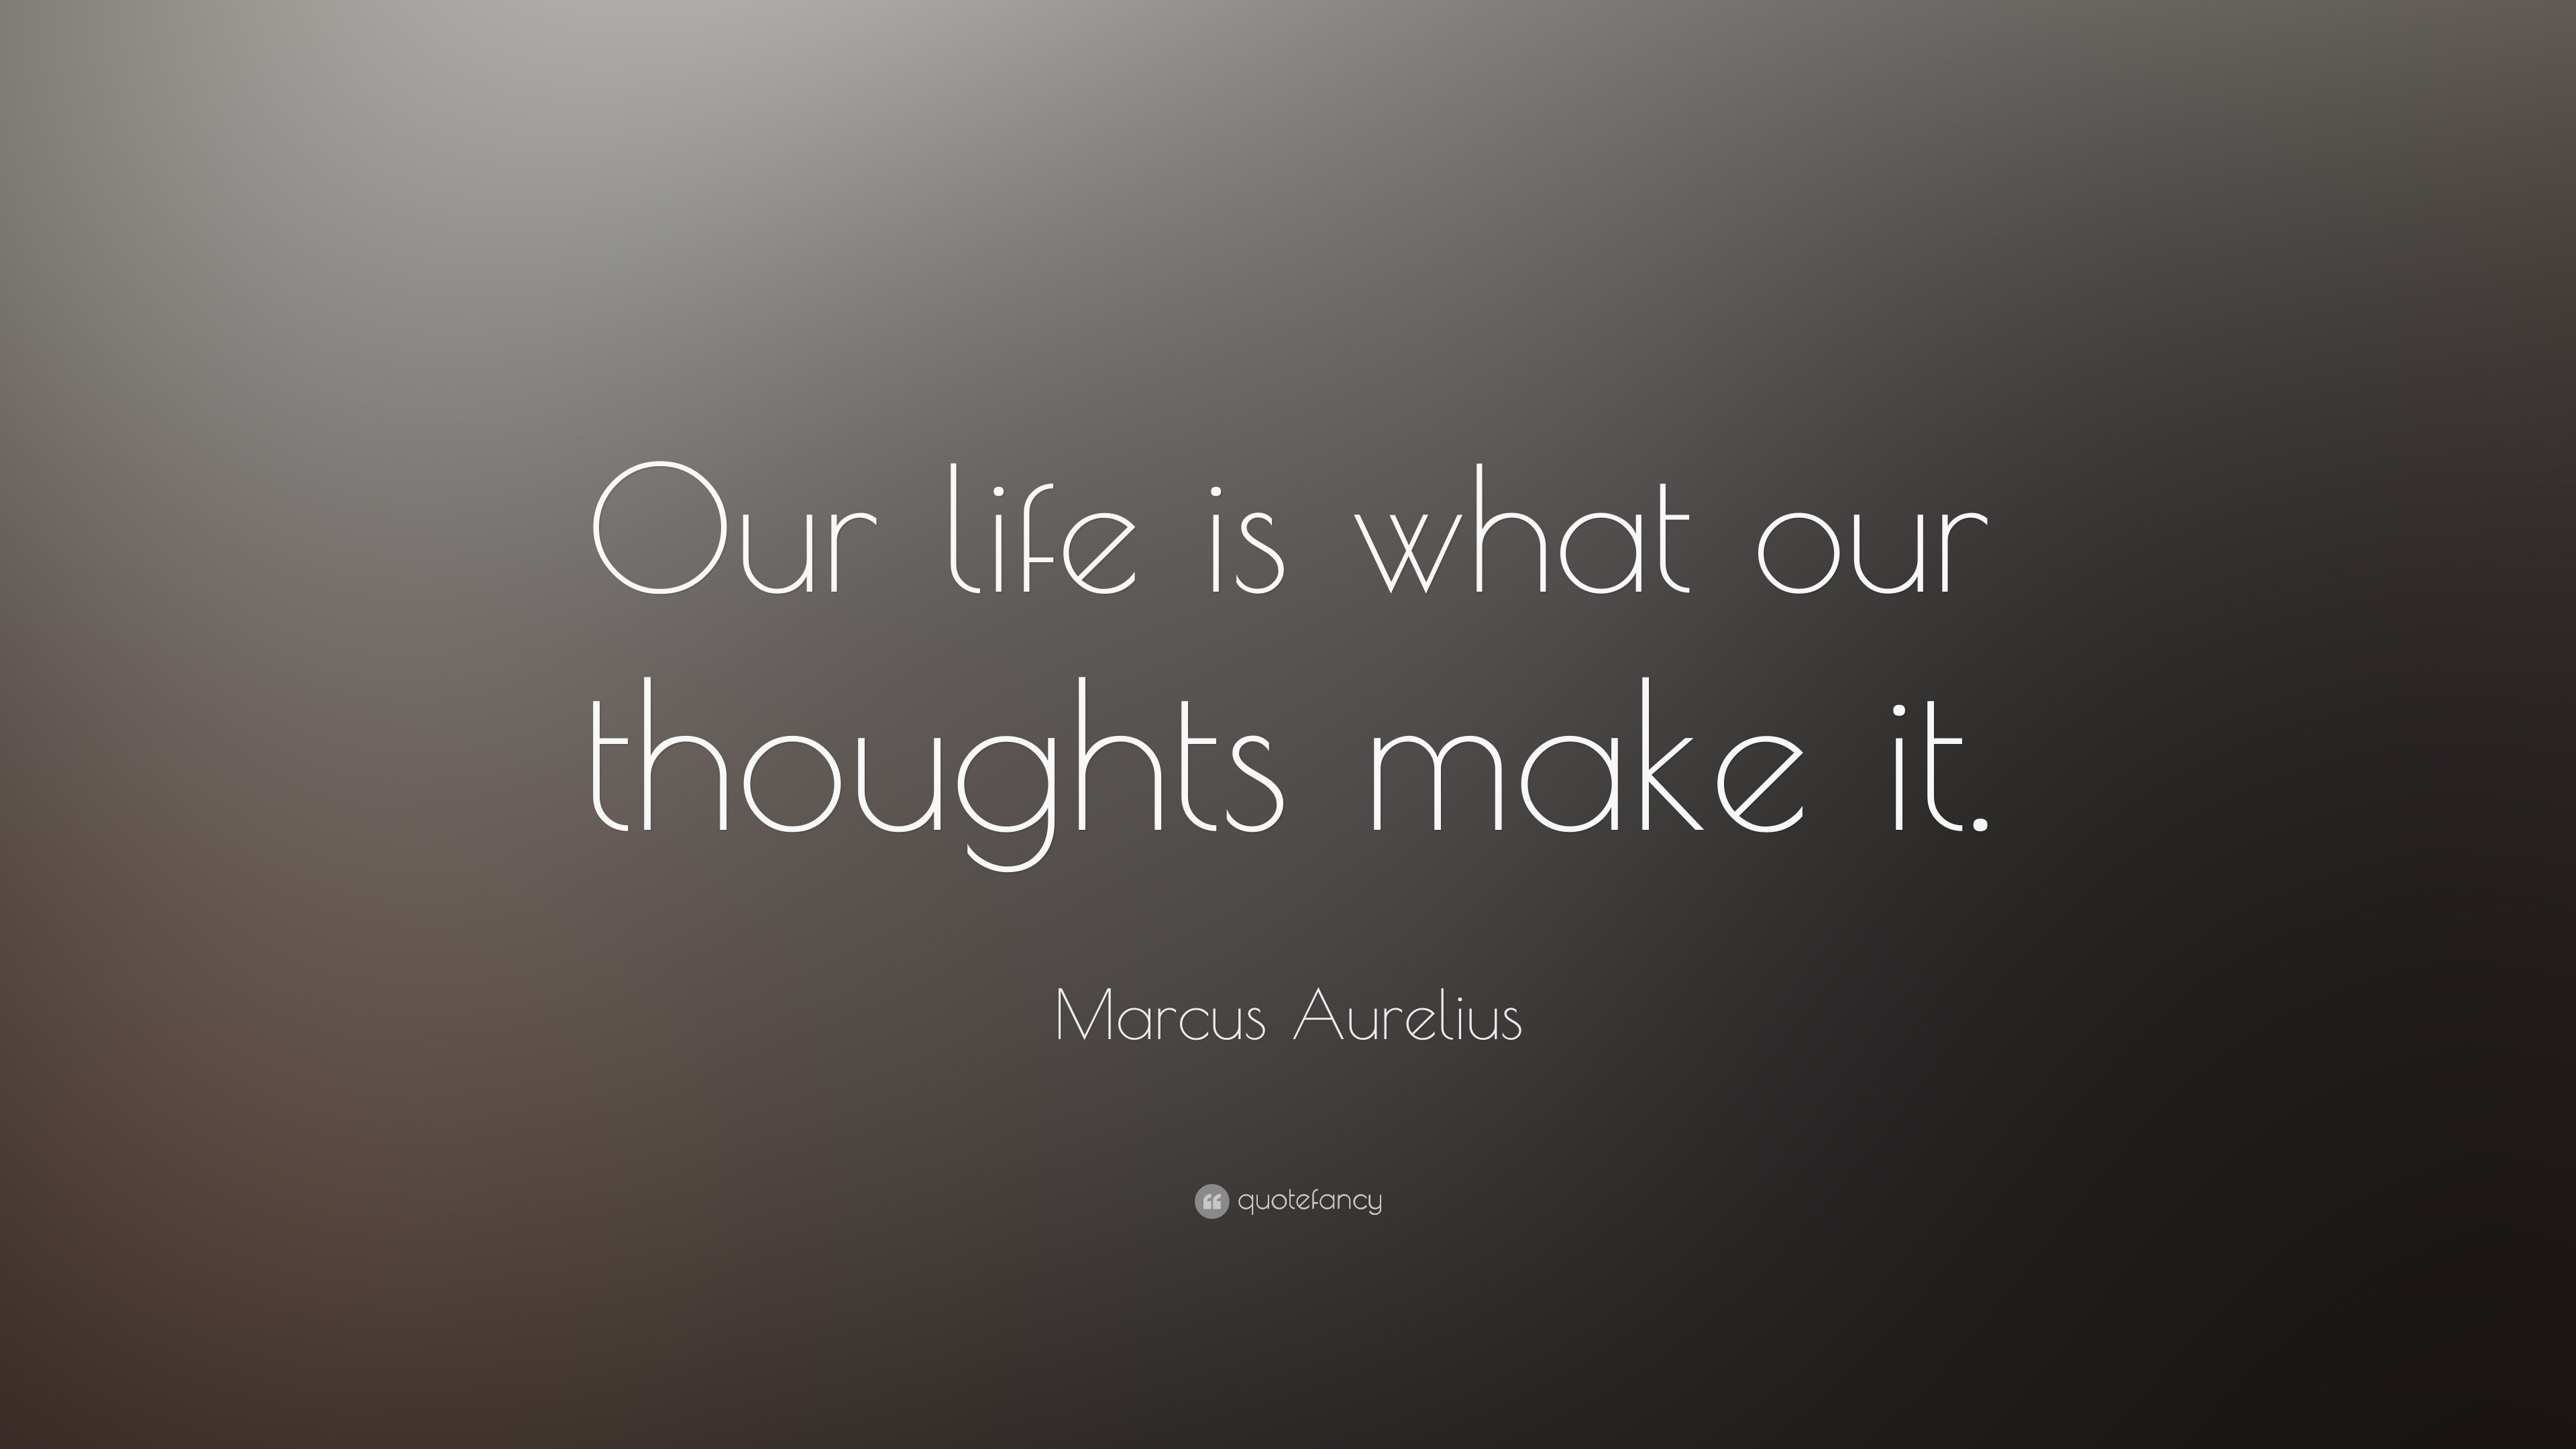 Marcus Aurelius Quote: “Our life is what our thoughts make it.”